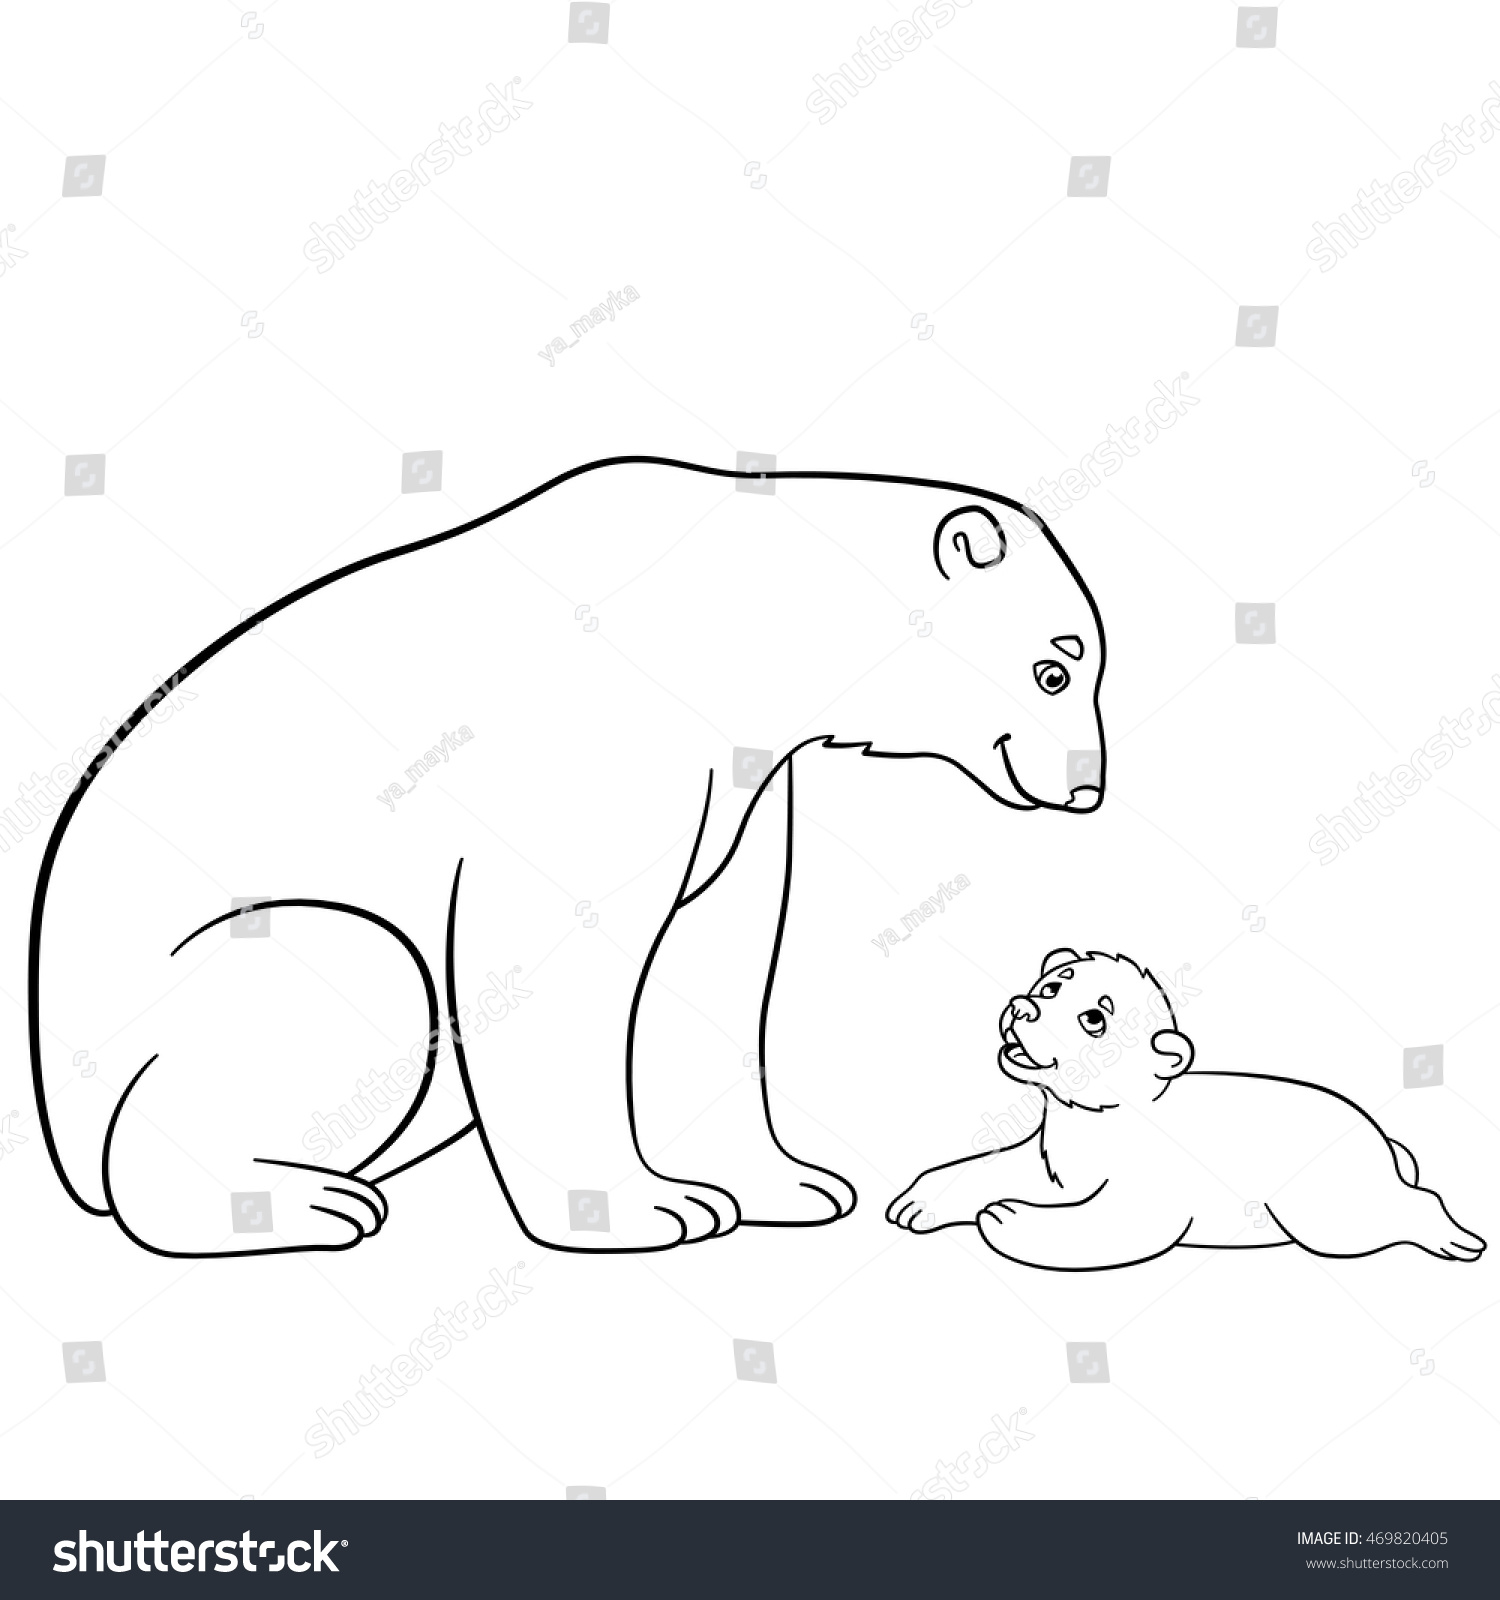 Coloring pages Mother polar bear sits with her little cute baby and smiles